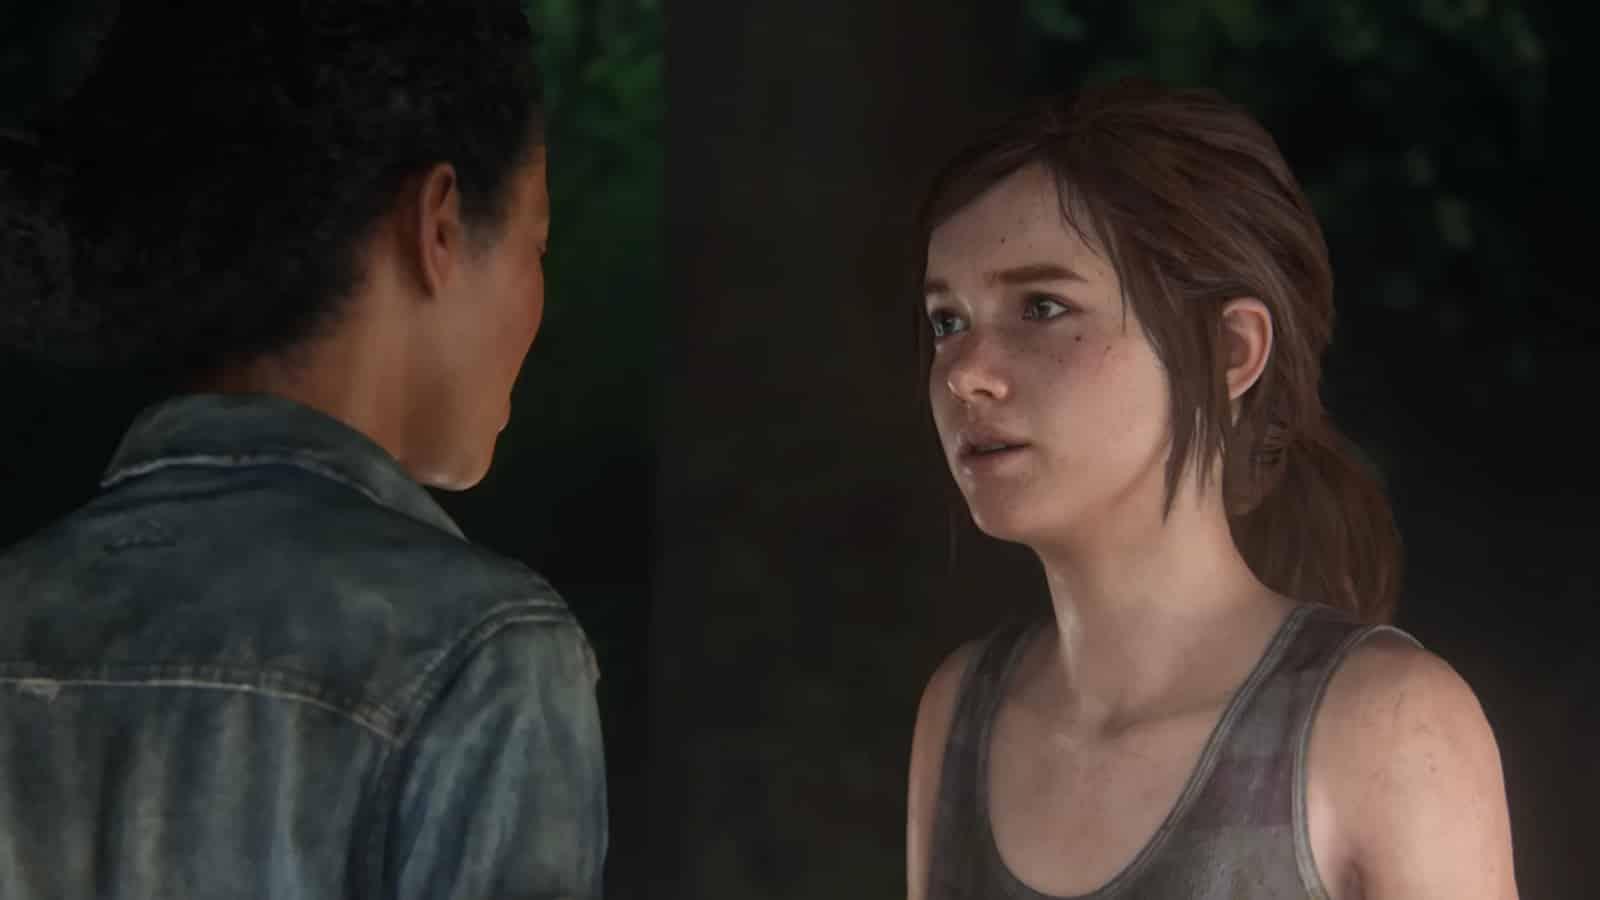 Naughty Dog reveals more details about 'The Last of Us' remake for